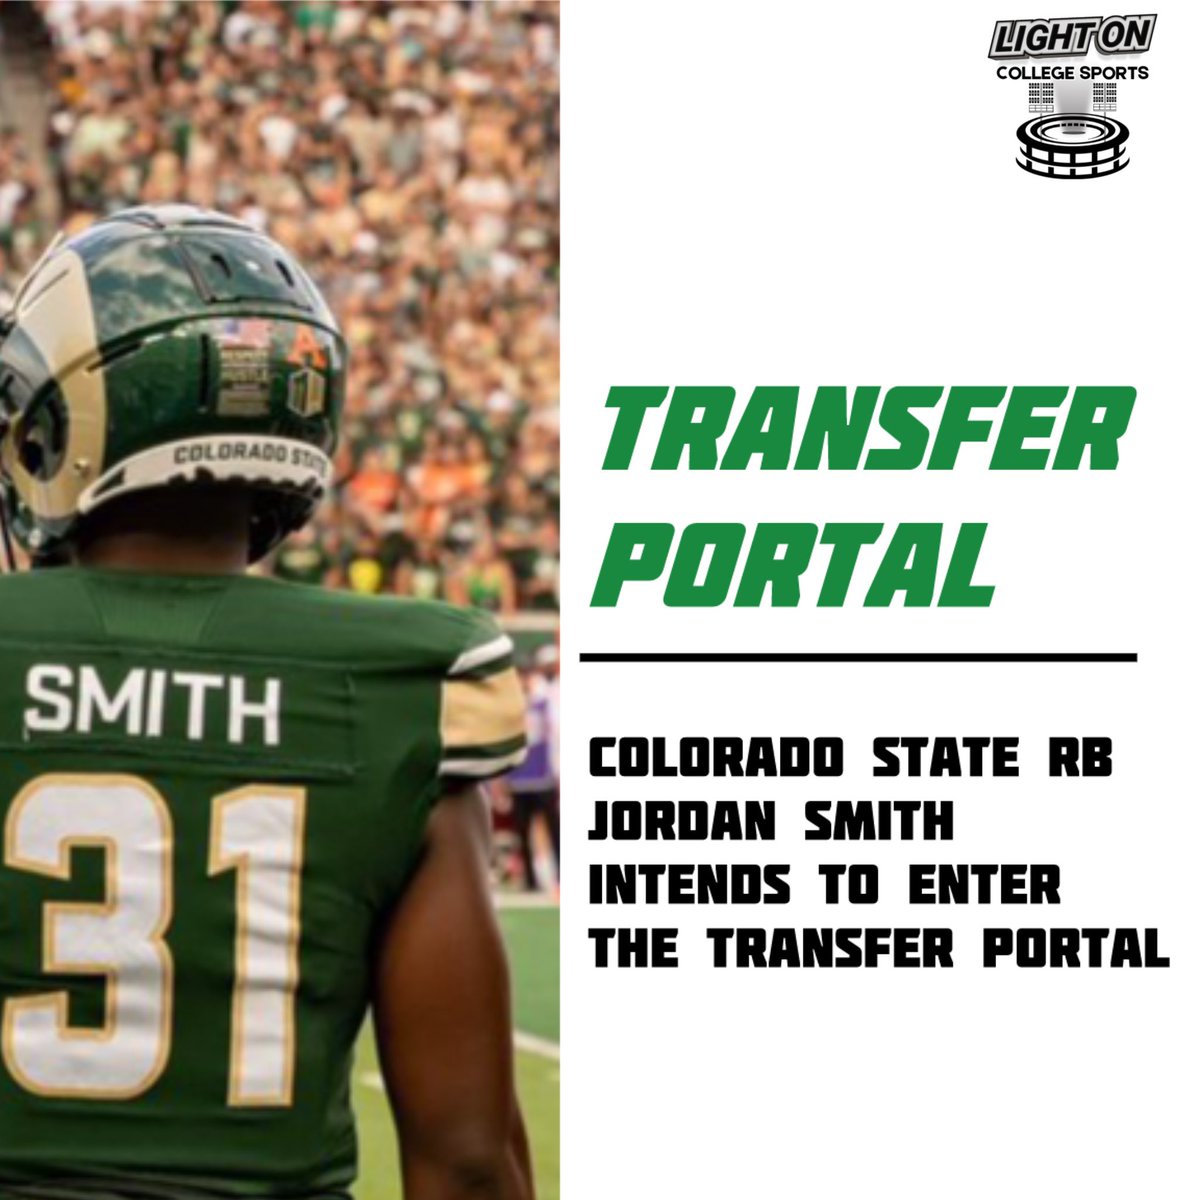 Colorado State RB Jordan Smith intends to enter the transfer portal, per his social media. He has 2 years of eligibility remaining. @1Jordan_Smith1